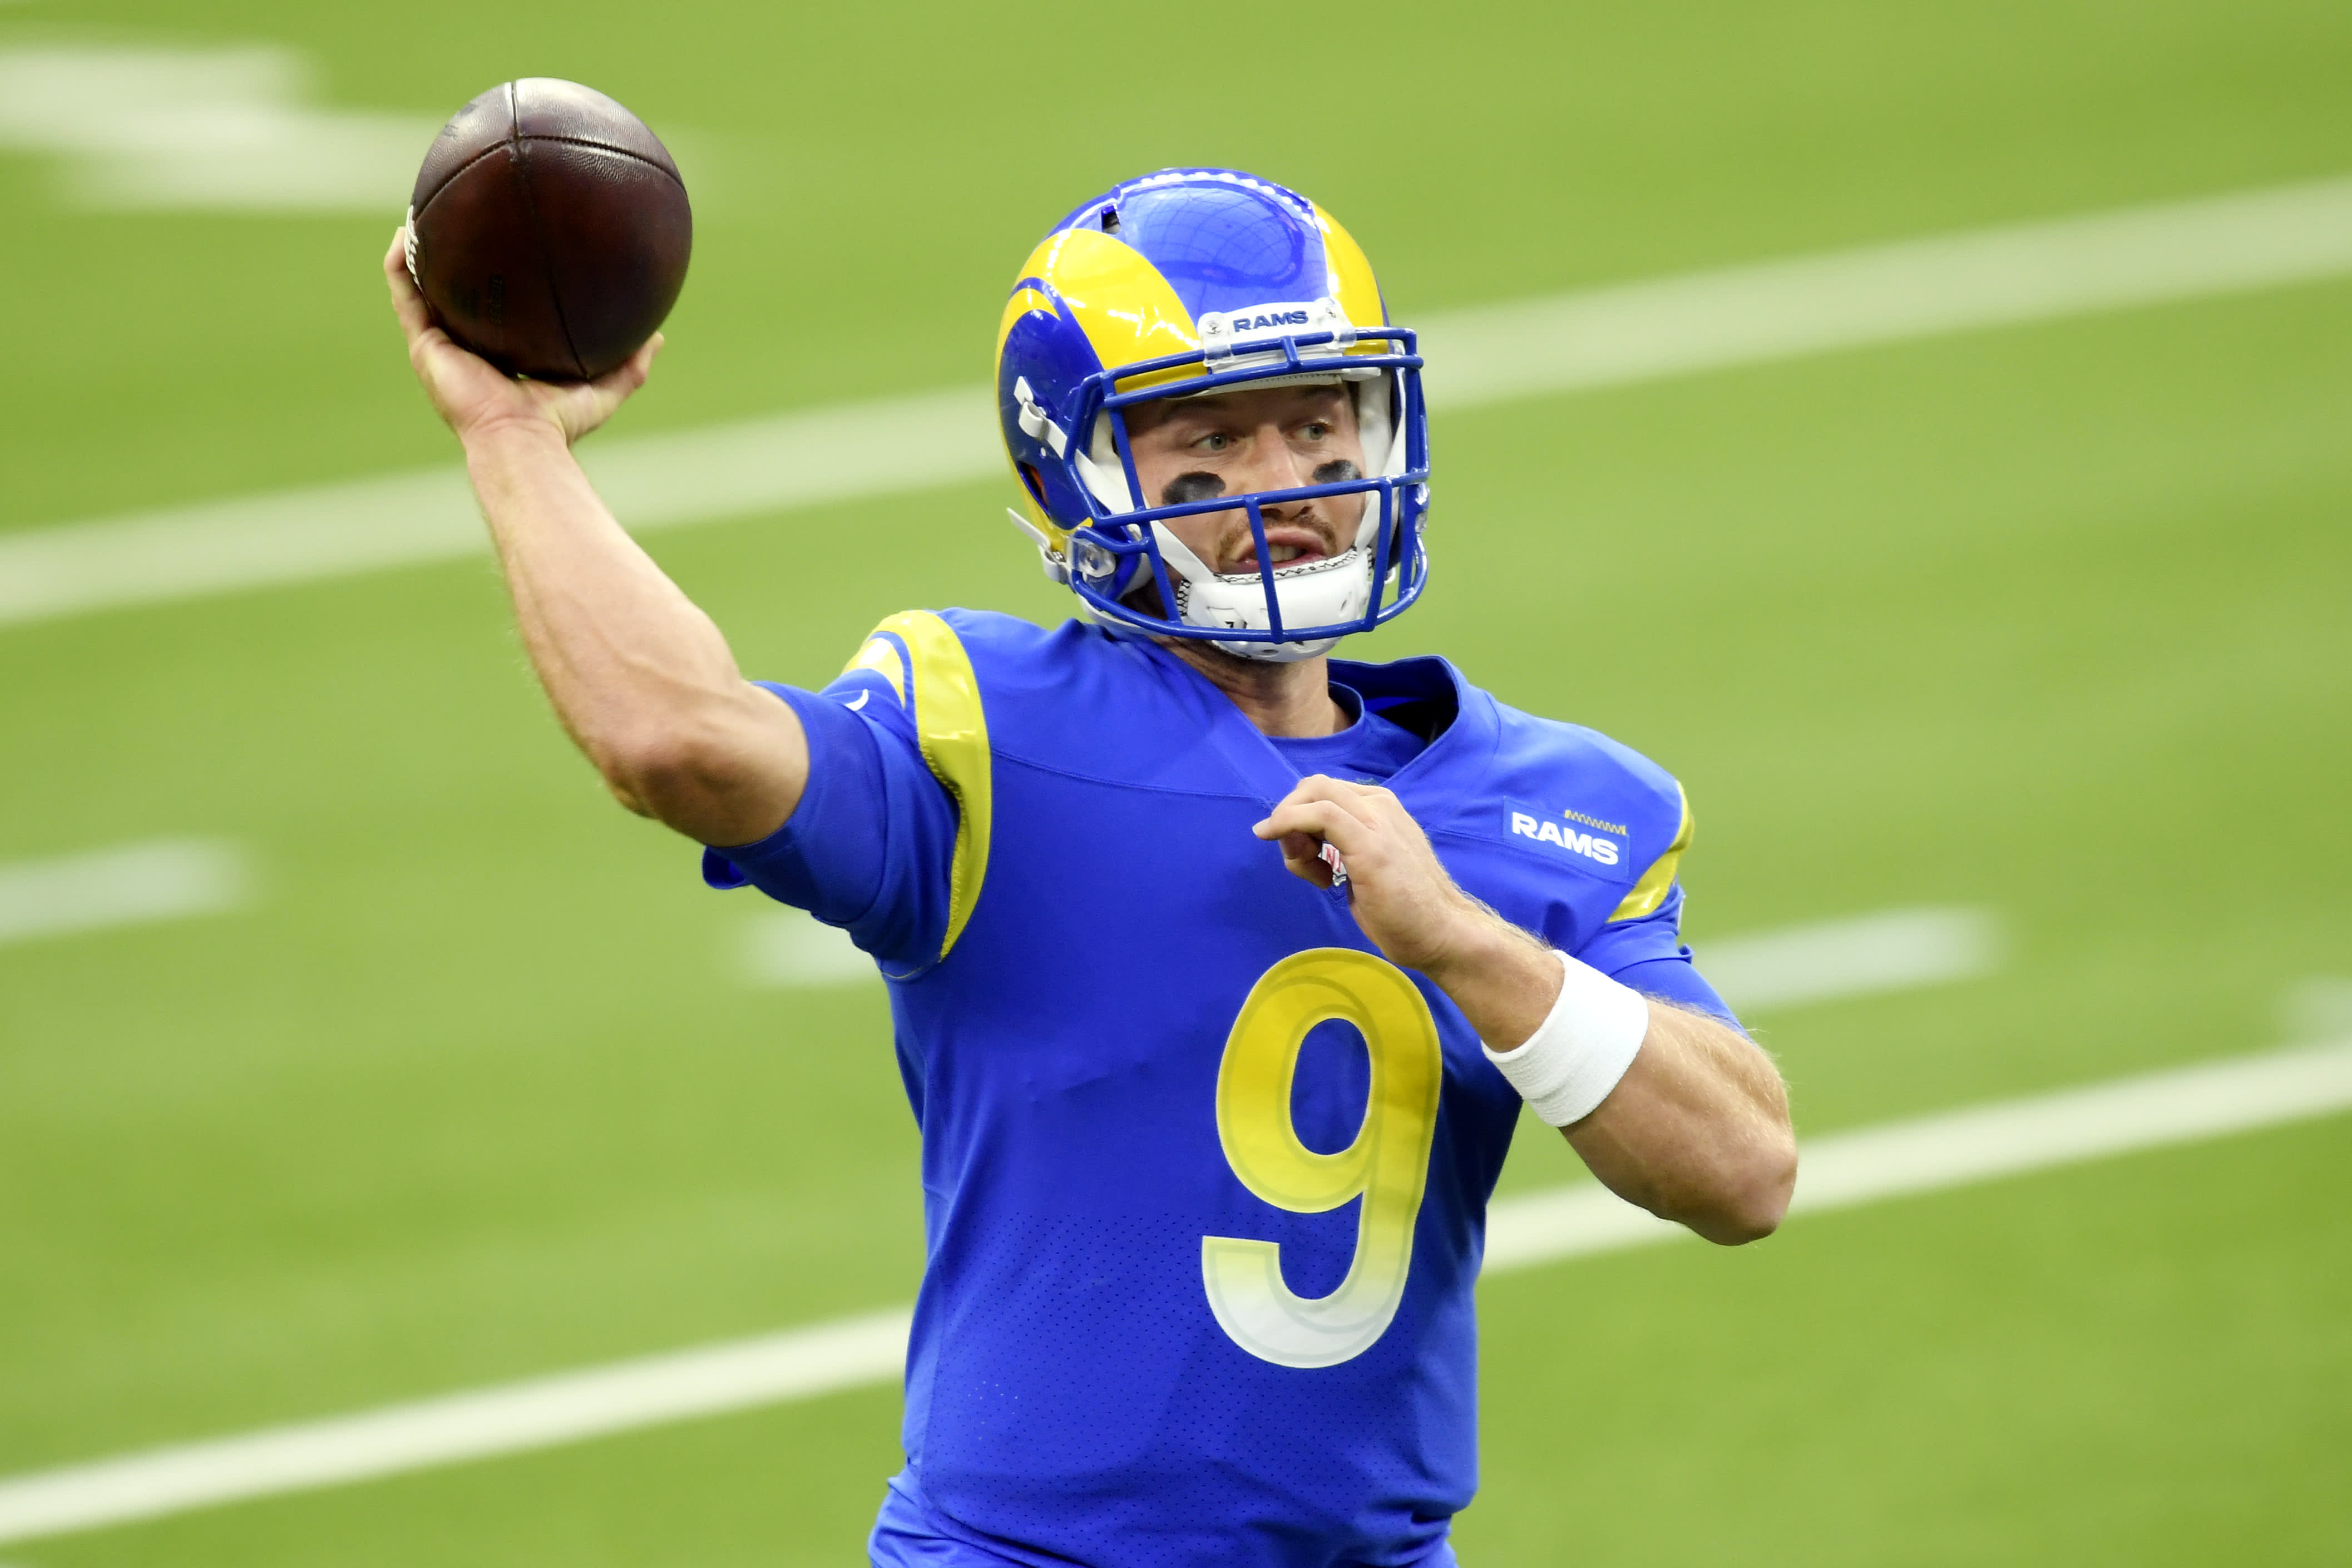 Since the QB not worked out, John Wolford helped Rams reach the playoffs